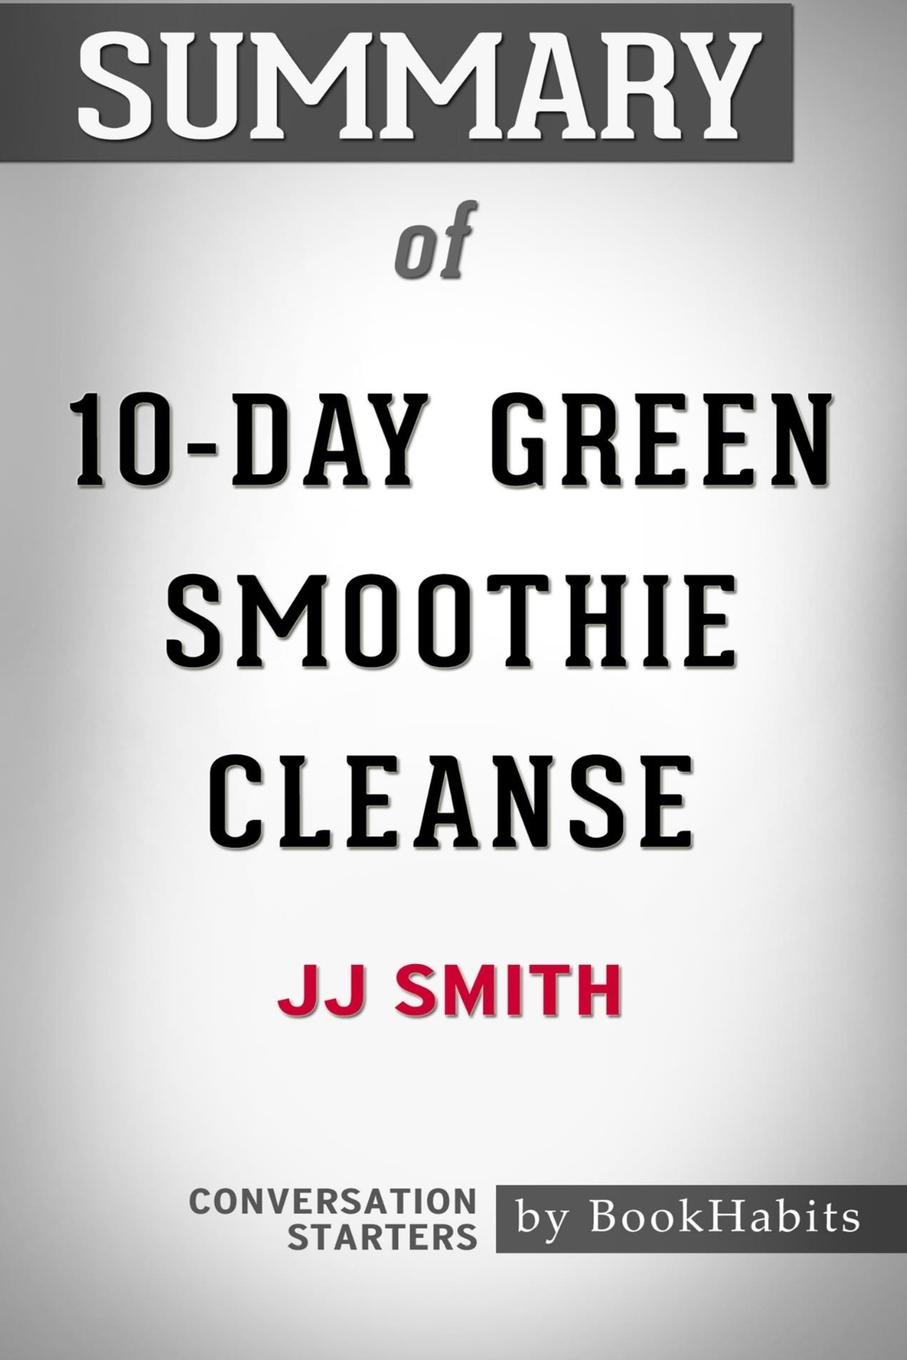 Summary of 10-Day Green Smoothie Cleanse by JJ Smith. 